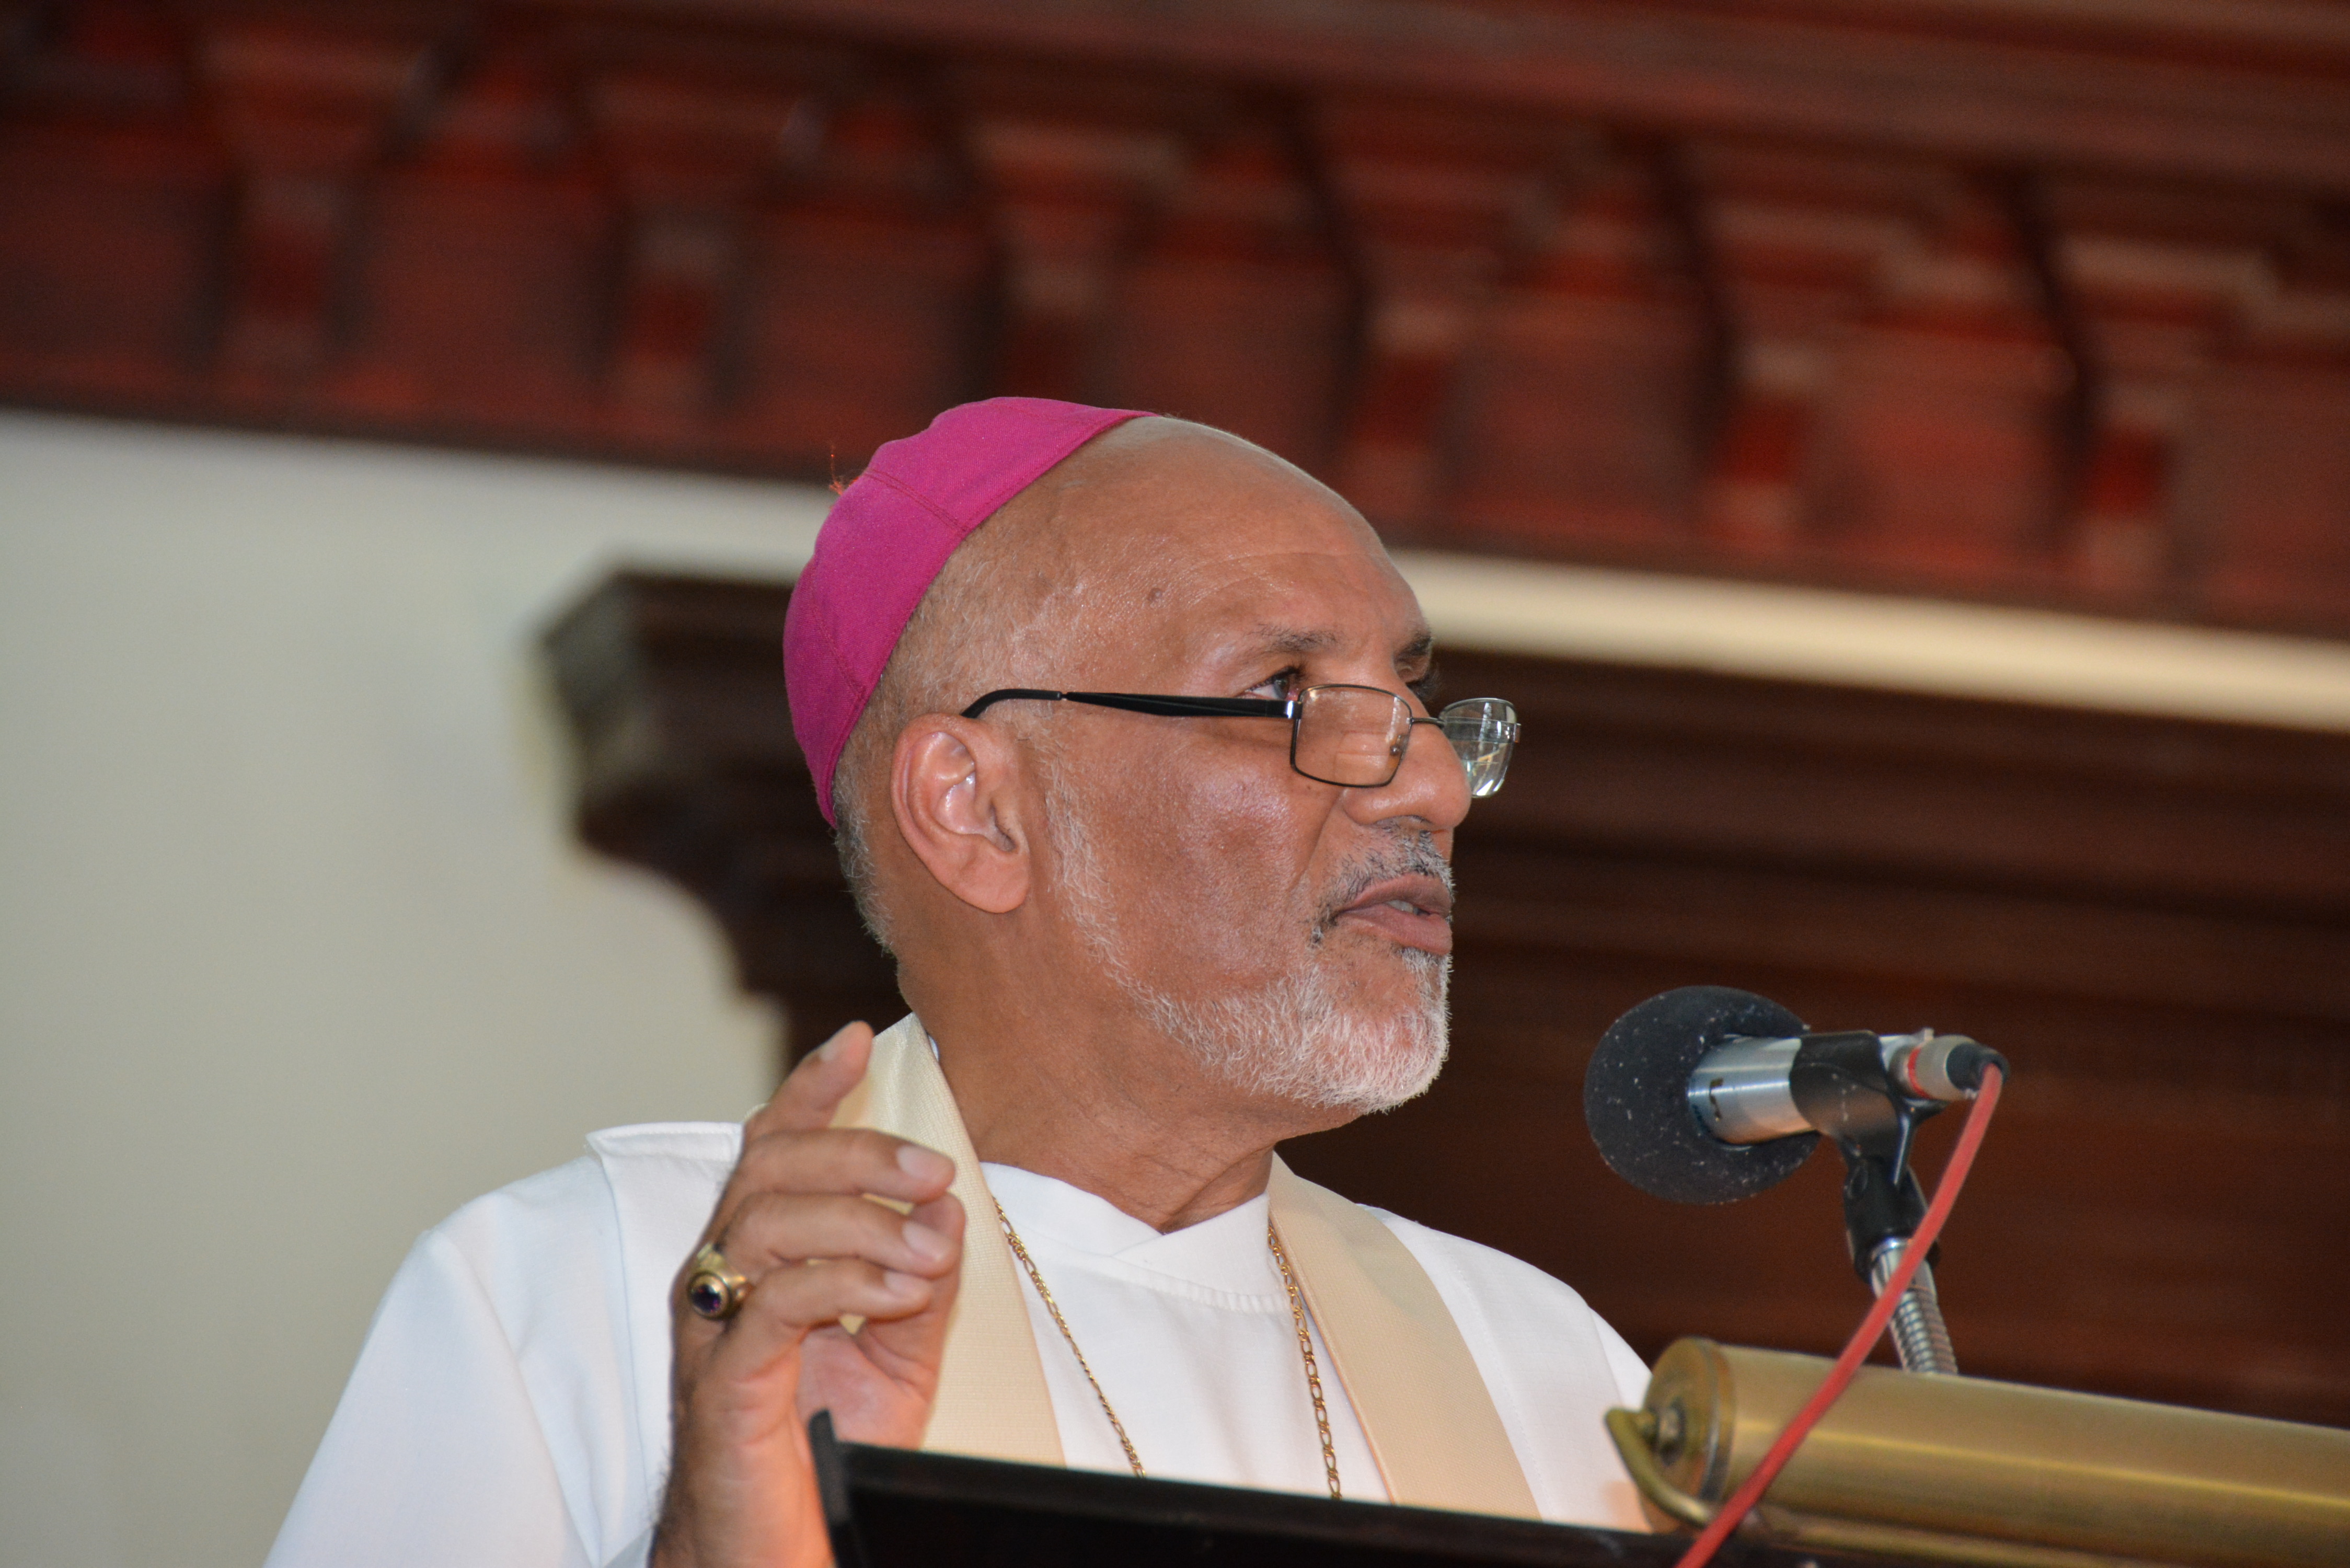 SERMON PREACHED BY THE RT. REV. HOWARD GREGORY BISHOP OF JAMAICA & THE CAYMAN ISLANDS AT ST. GEORGE’S CHURCH, KINGSTON TO MARK THE CENTENARY OF THE DEATH OF ARCHBISHOP ENOS NUTTALL ON SUNDAY, MAY 29, 2016